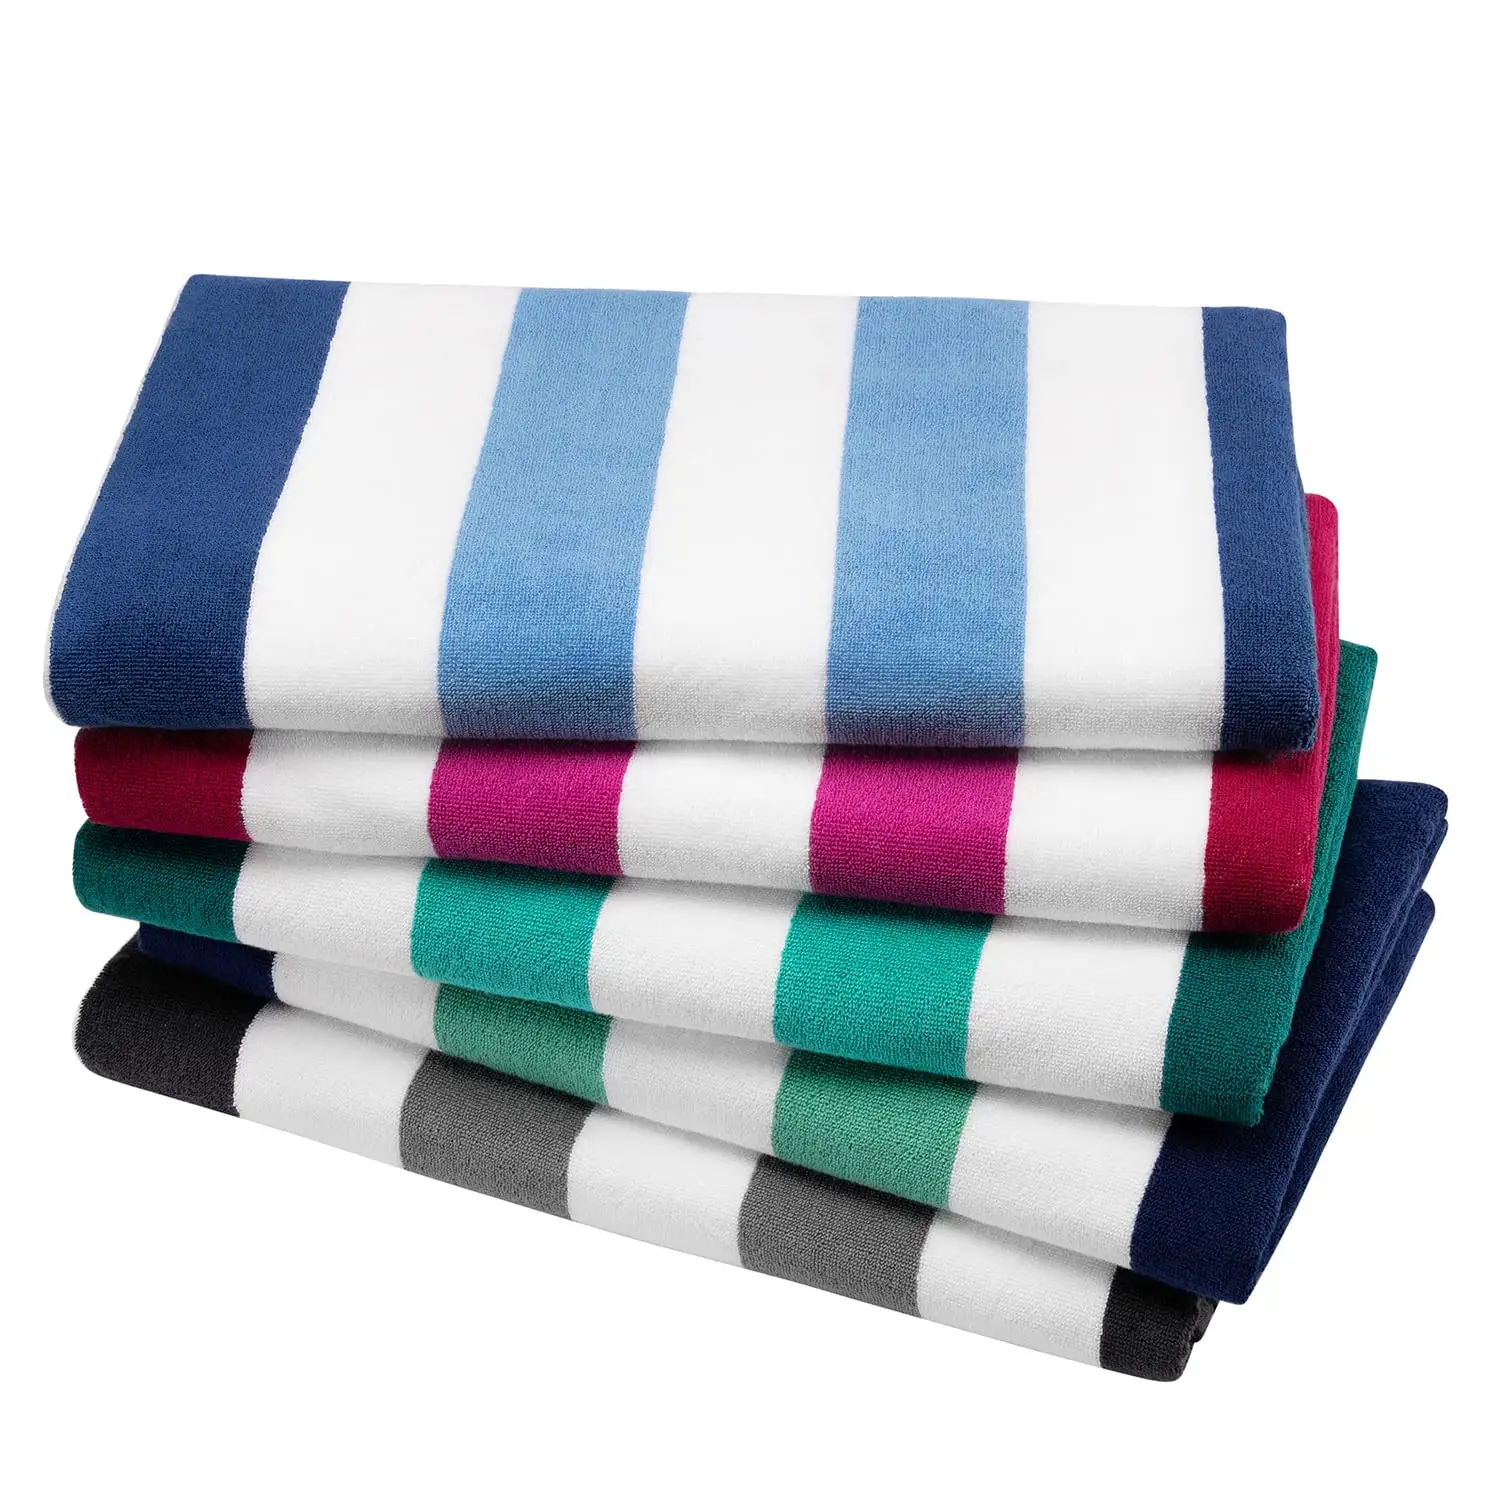 Europe hot sales instant drying striped beach towel adult swimming bath towel surf diving shawl microfiber absorbent towel